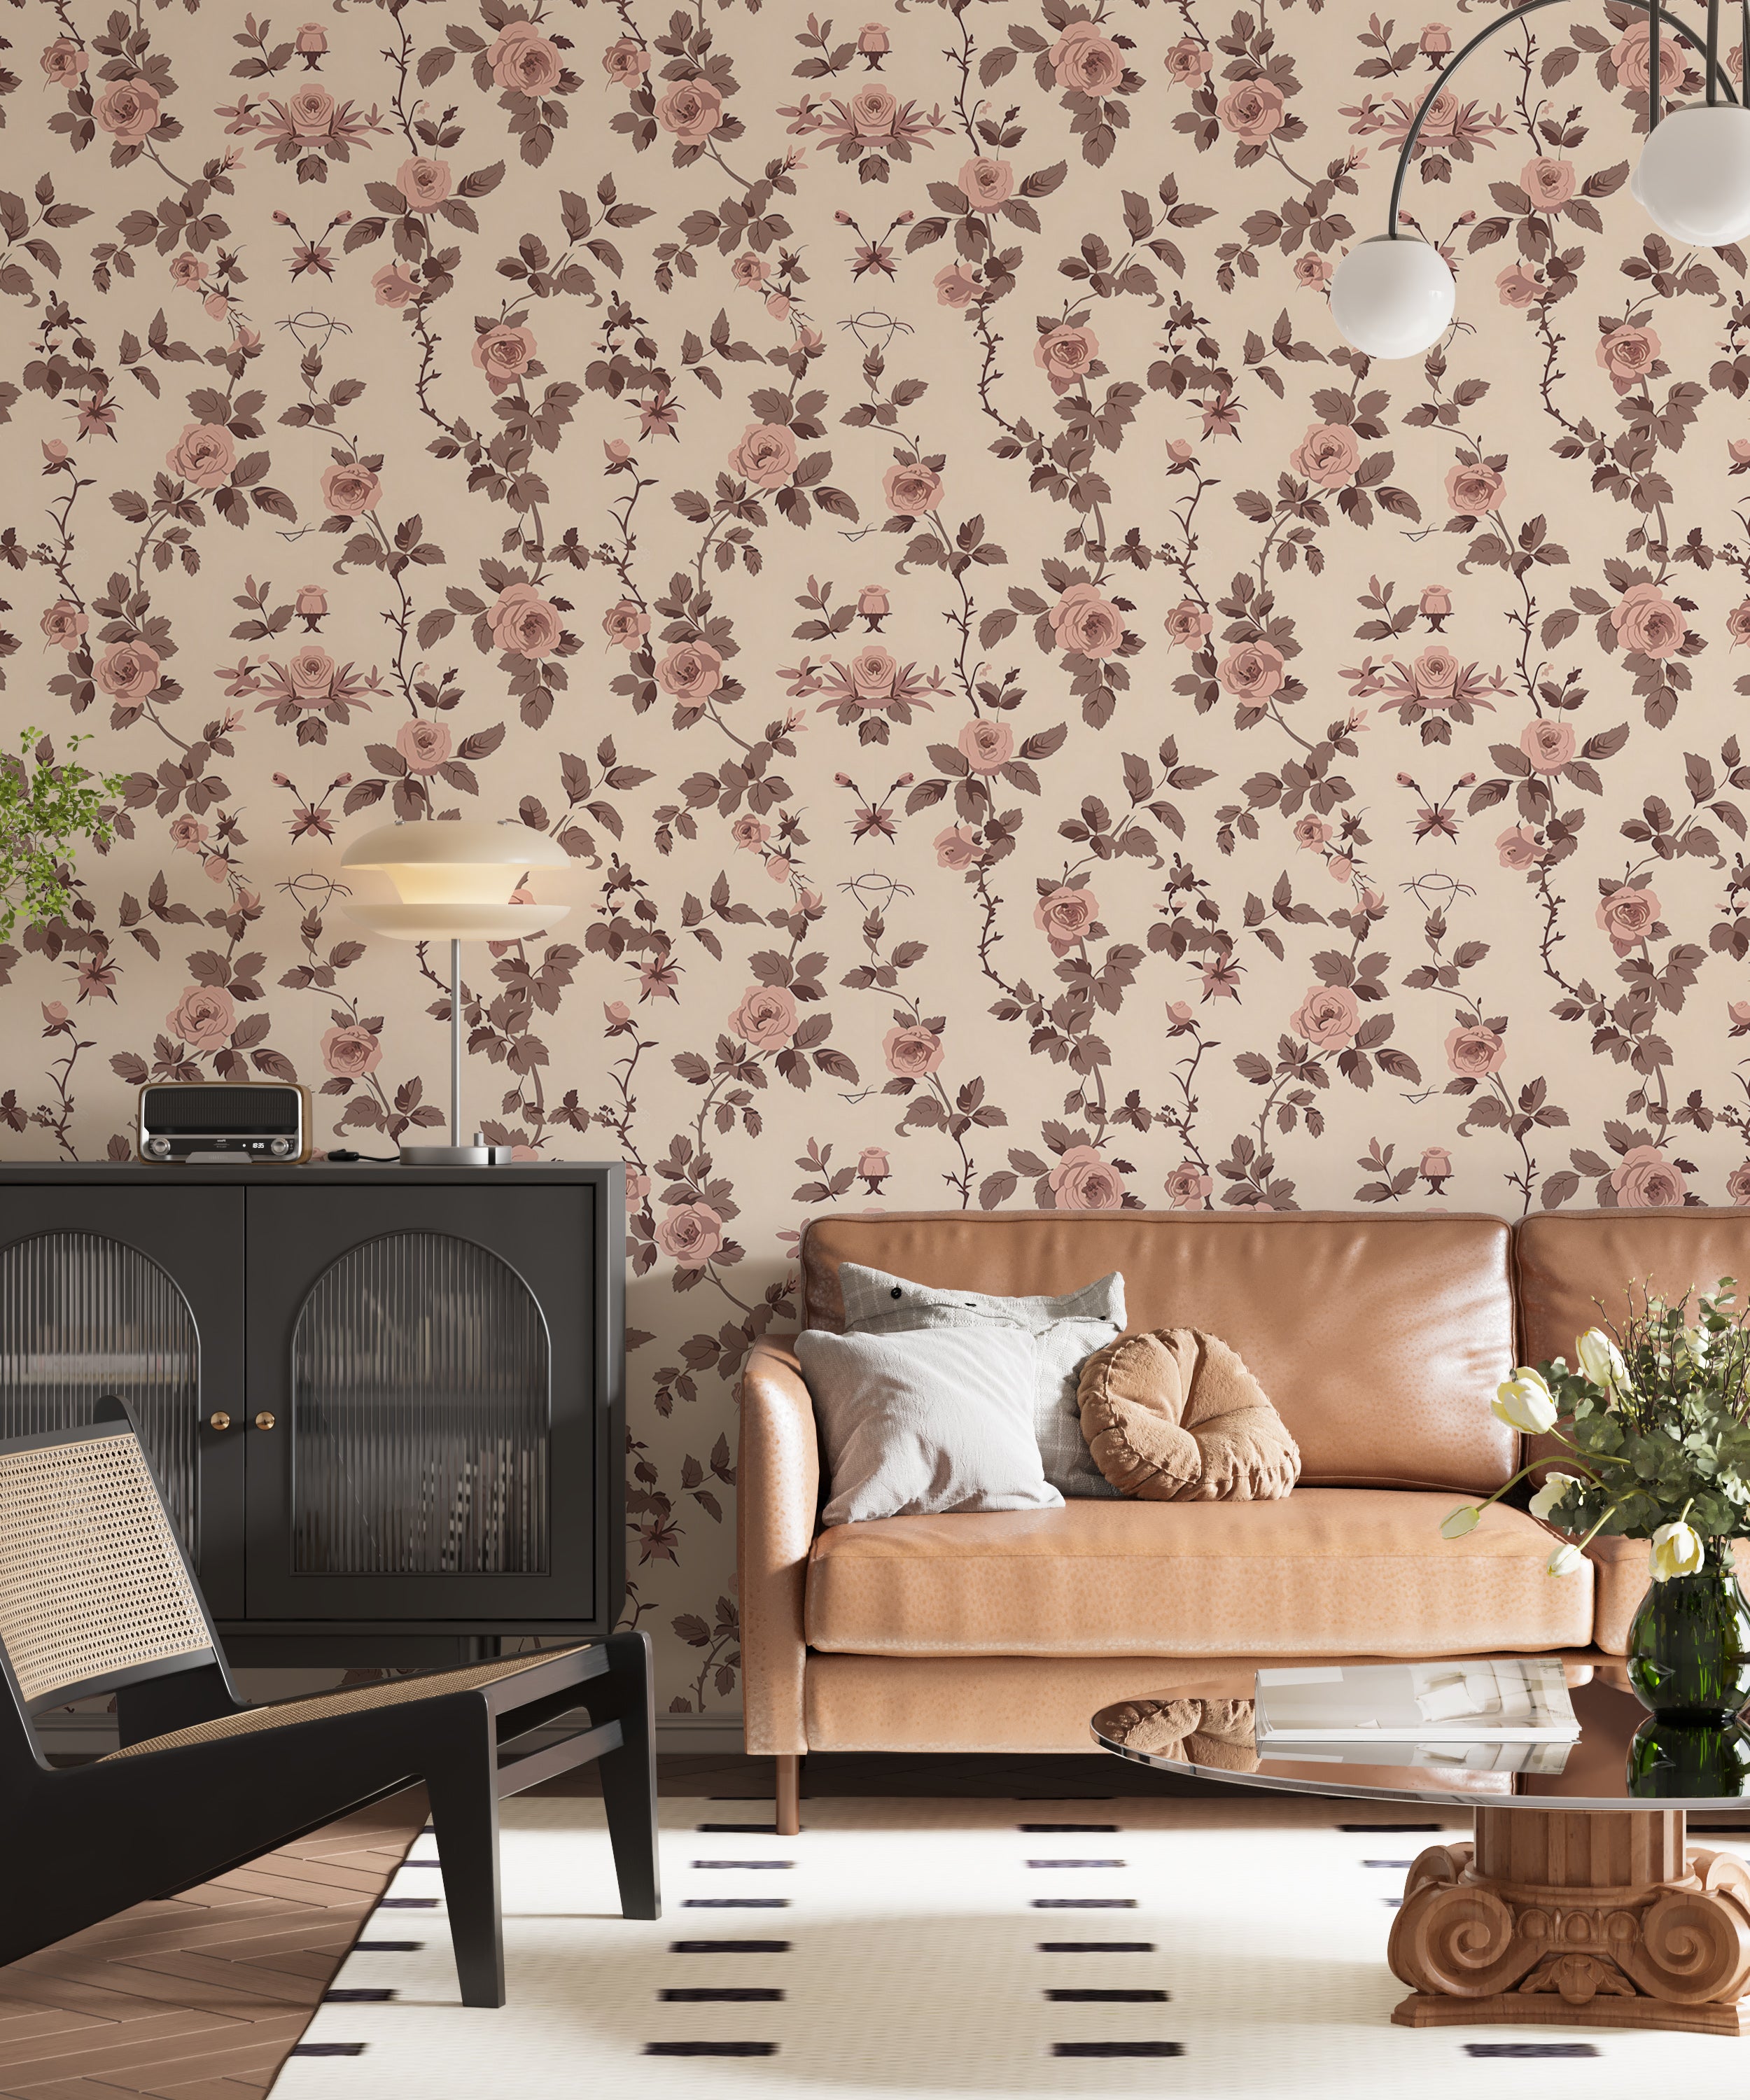 Cozy flower pattern wallpaper for a warm ambiance Removable floral wall decor in beige and brown hues